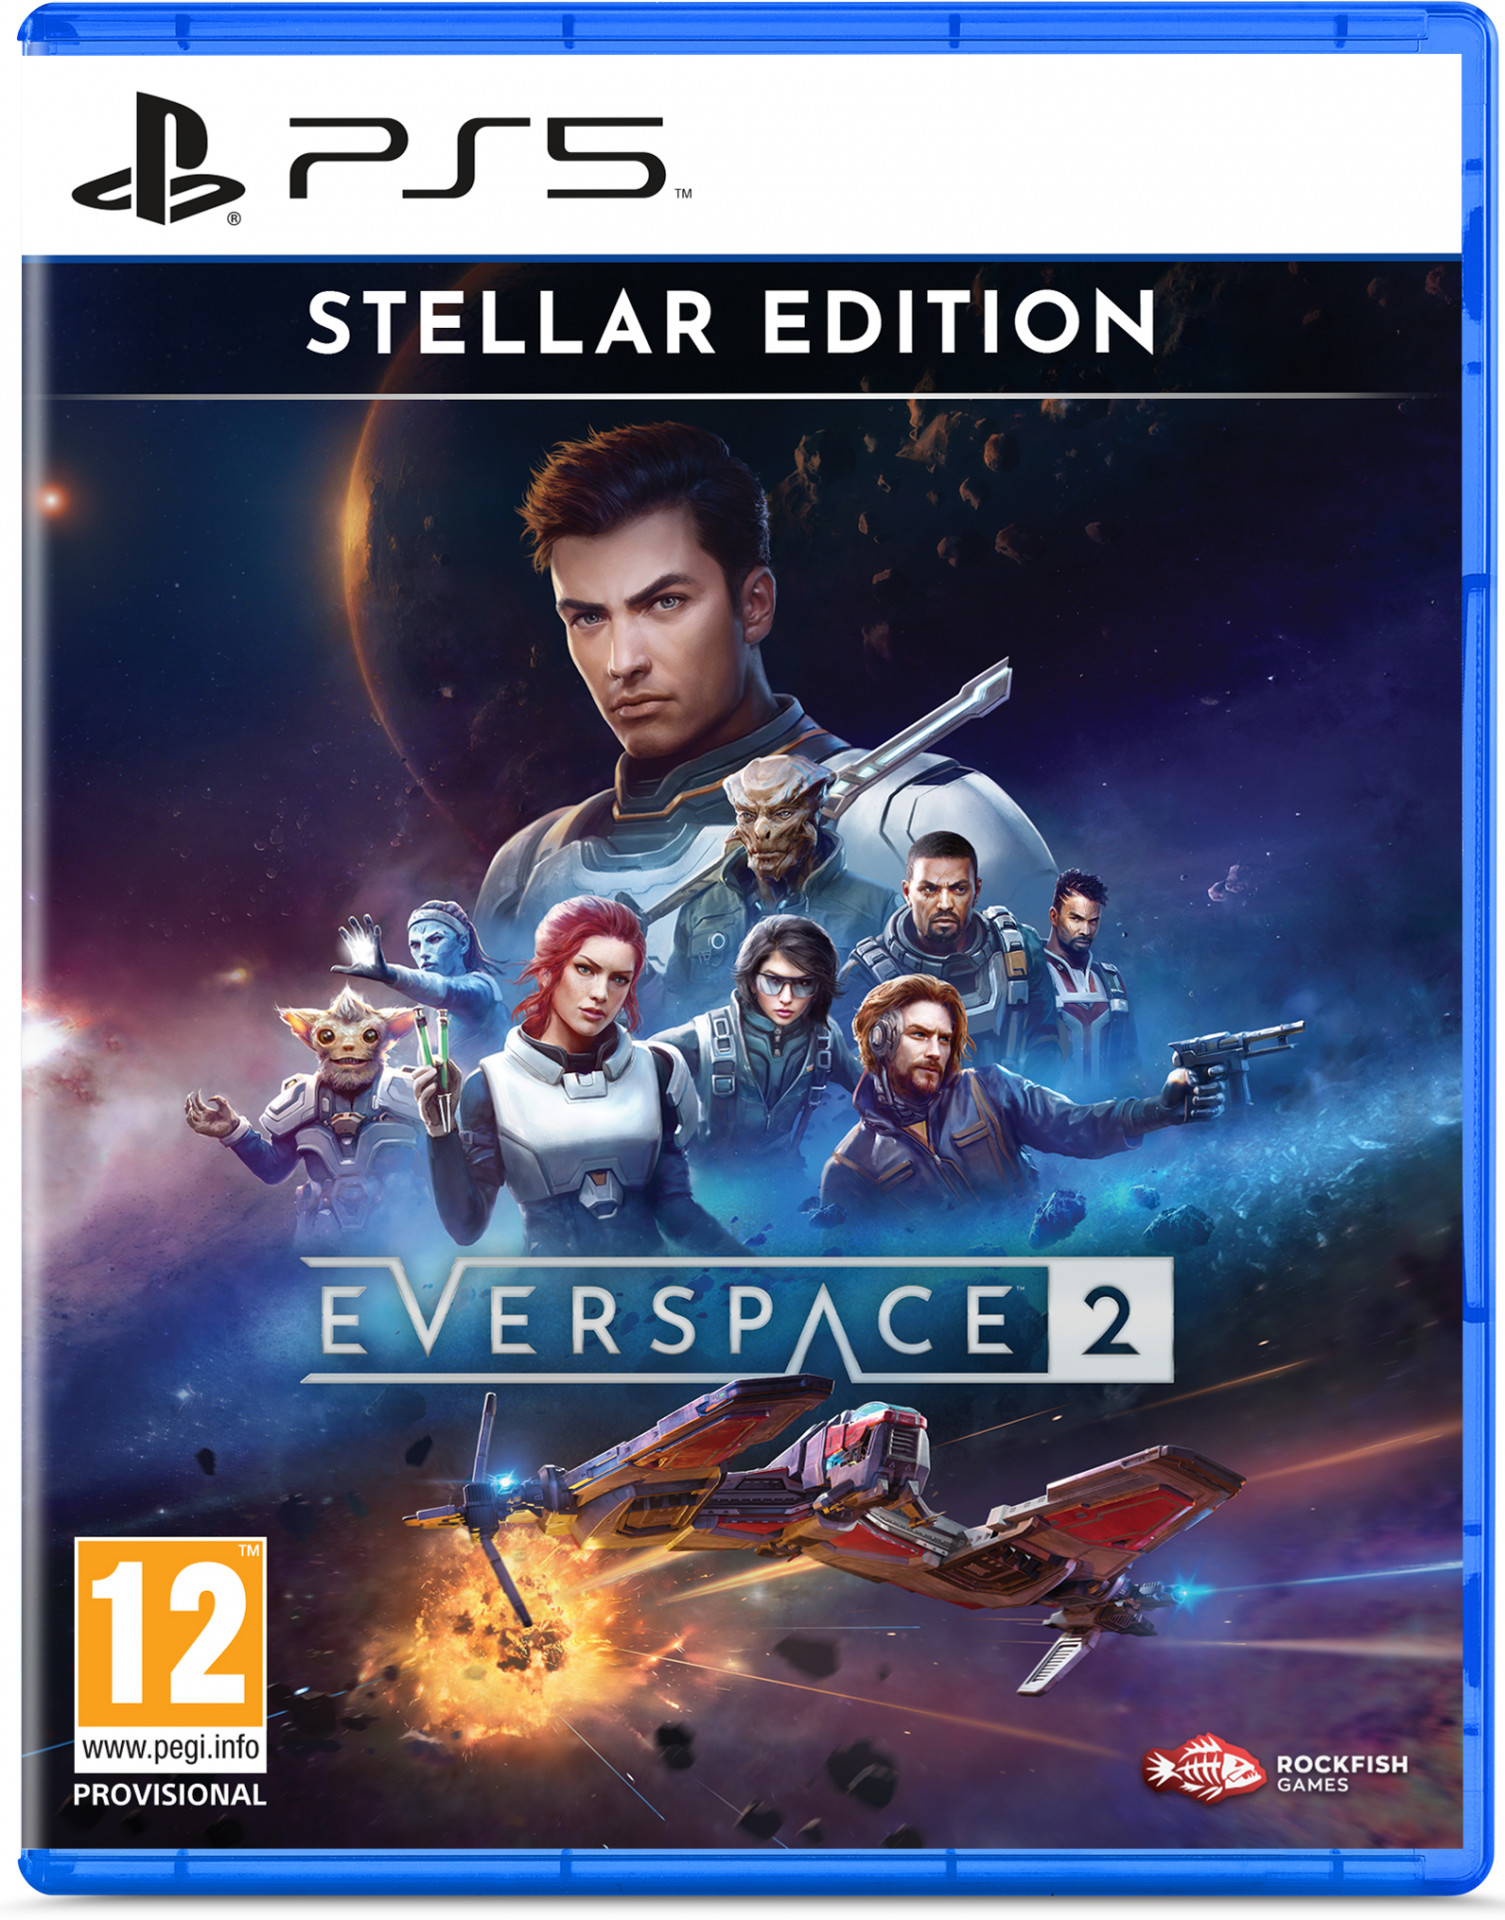 Everspace 2 - Stellar Edition (PS5), Rockfish Games